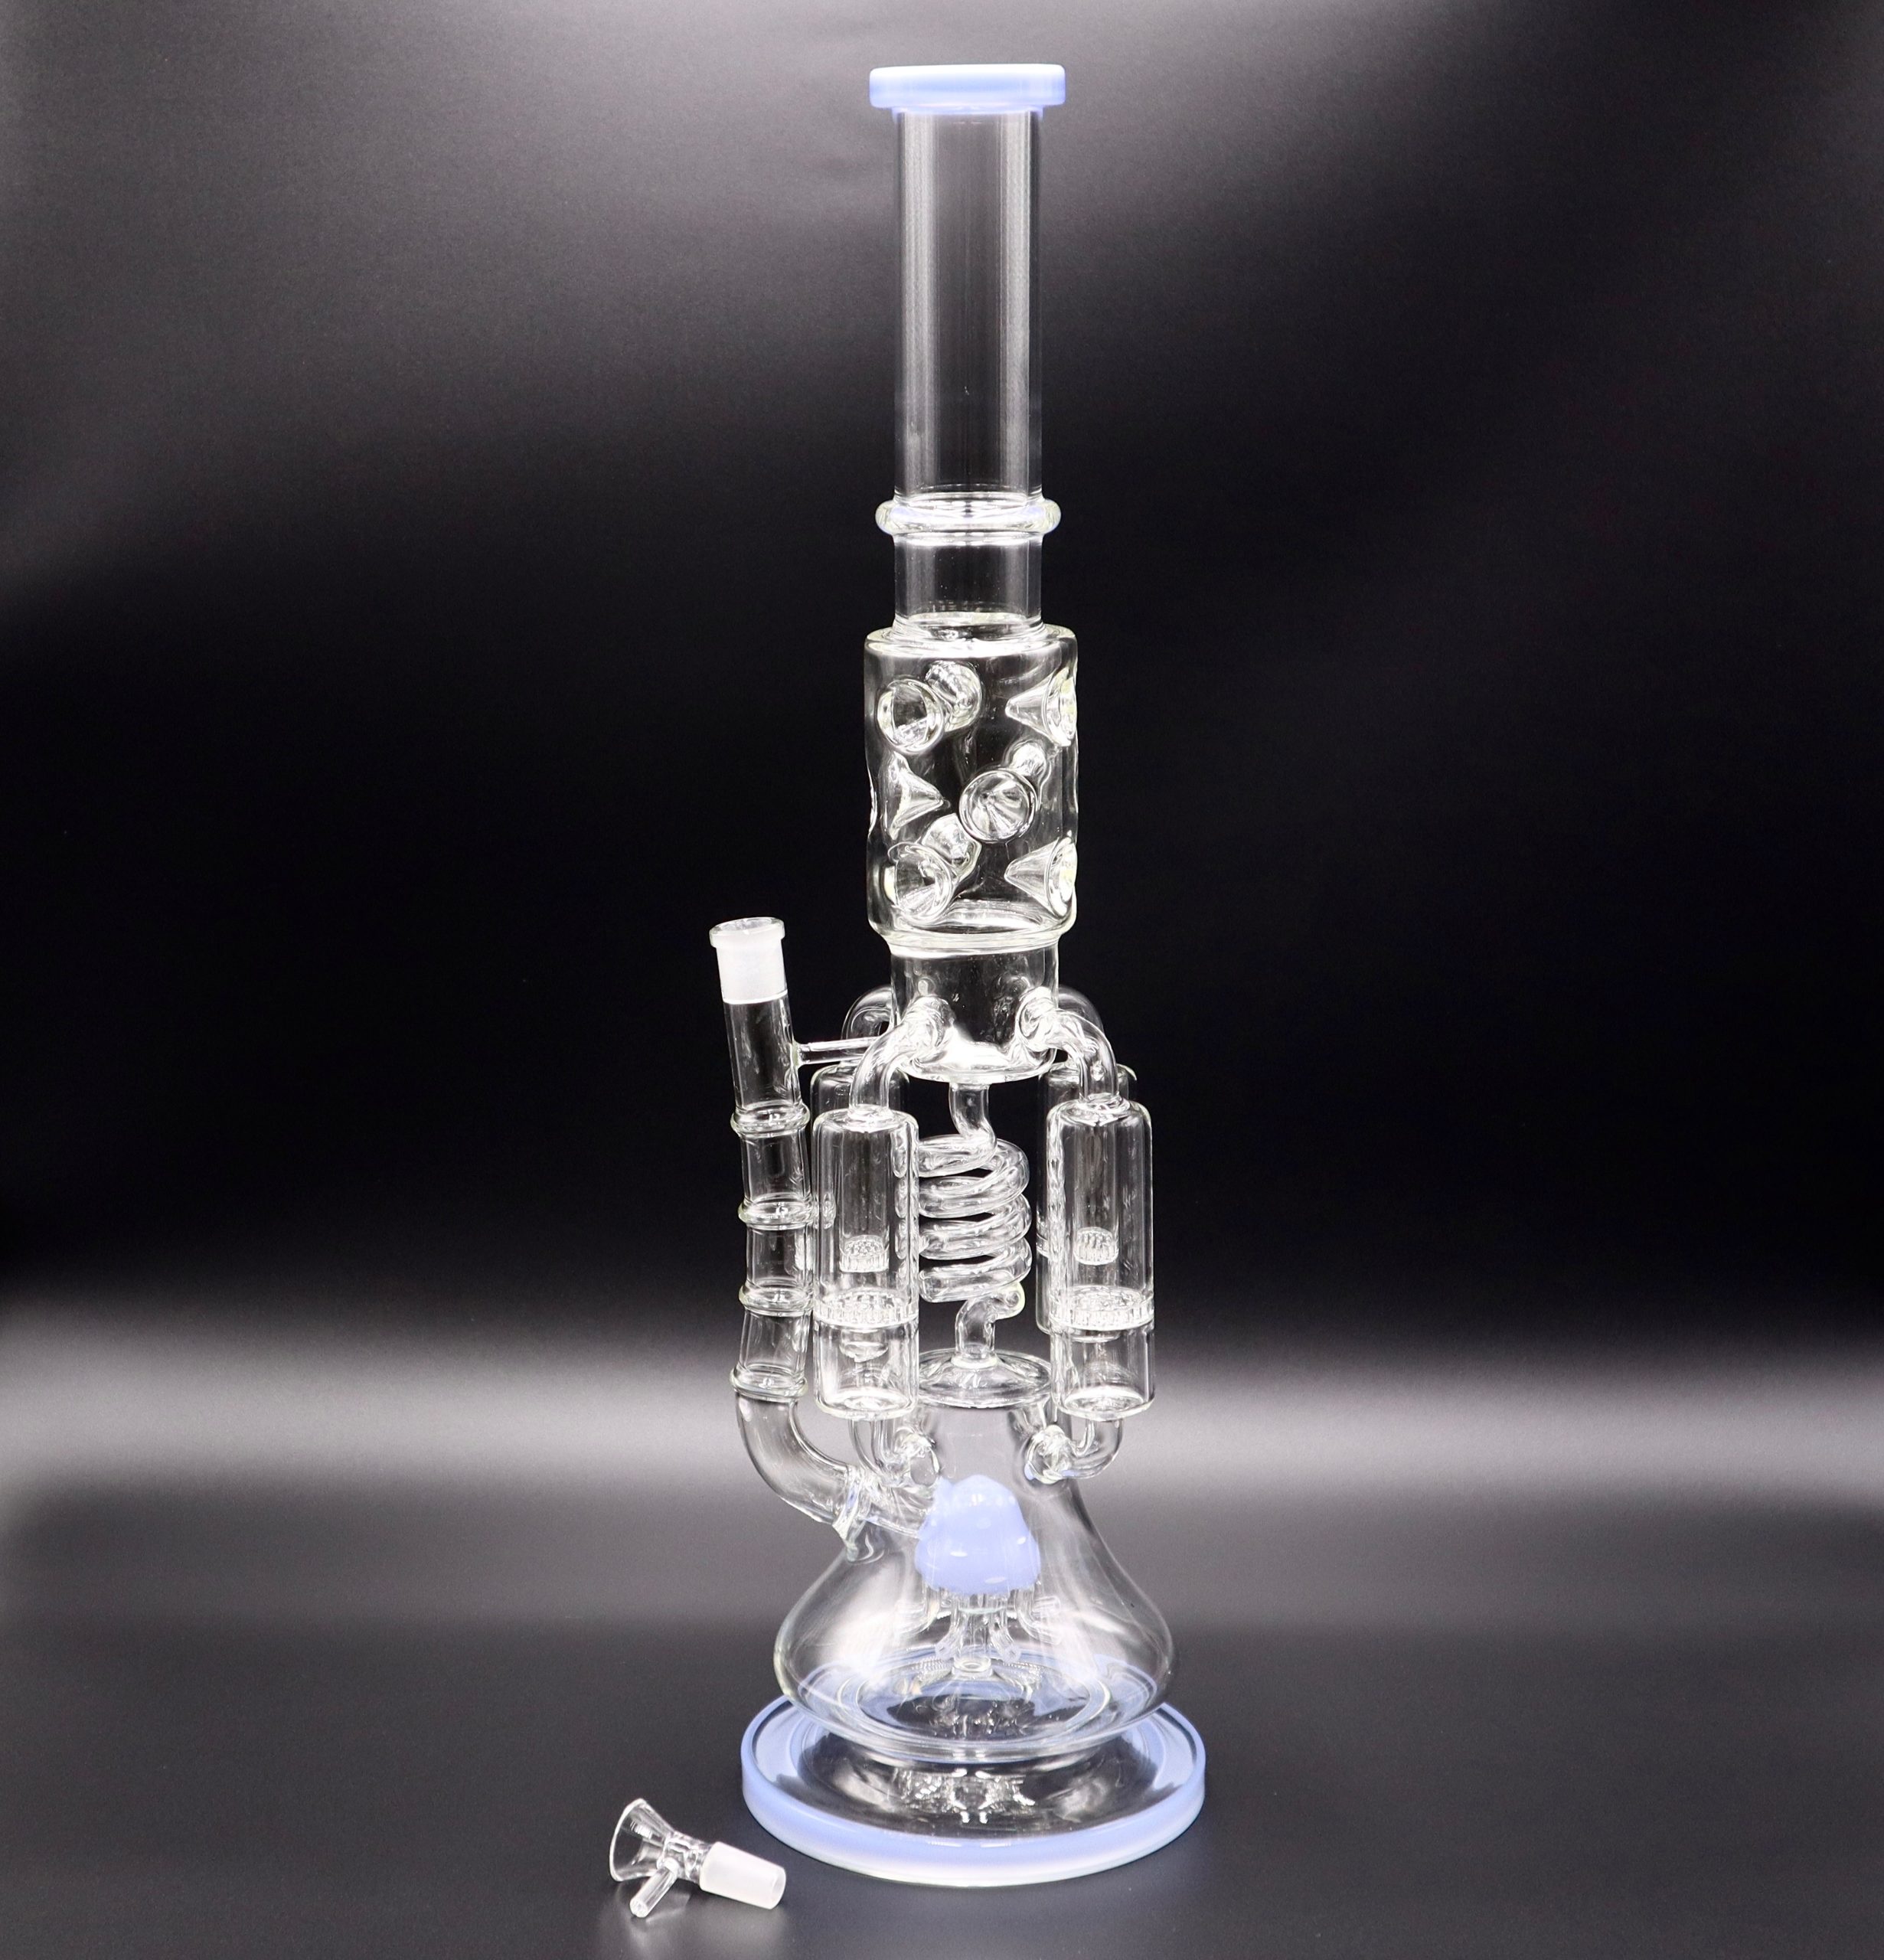 New Glass Water Bong Smoking Pipe With Jellyfish Percolator Glass Water  Pipes For Smoking For Tobacco And Oil Rig From Jiangjihuo, $41.12